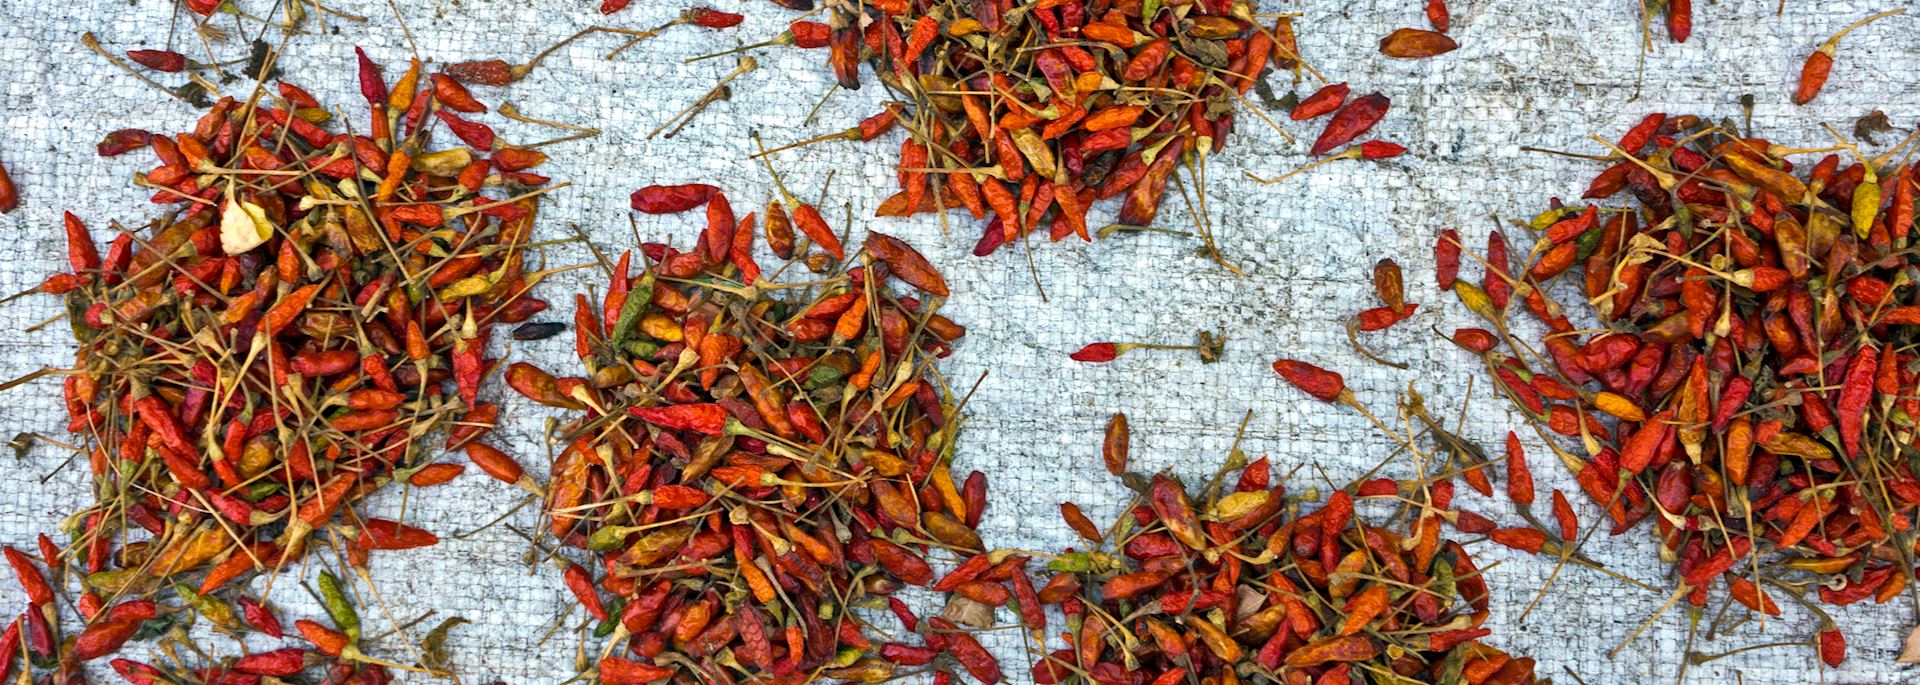 Chillies drying in a Mozambique market